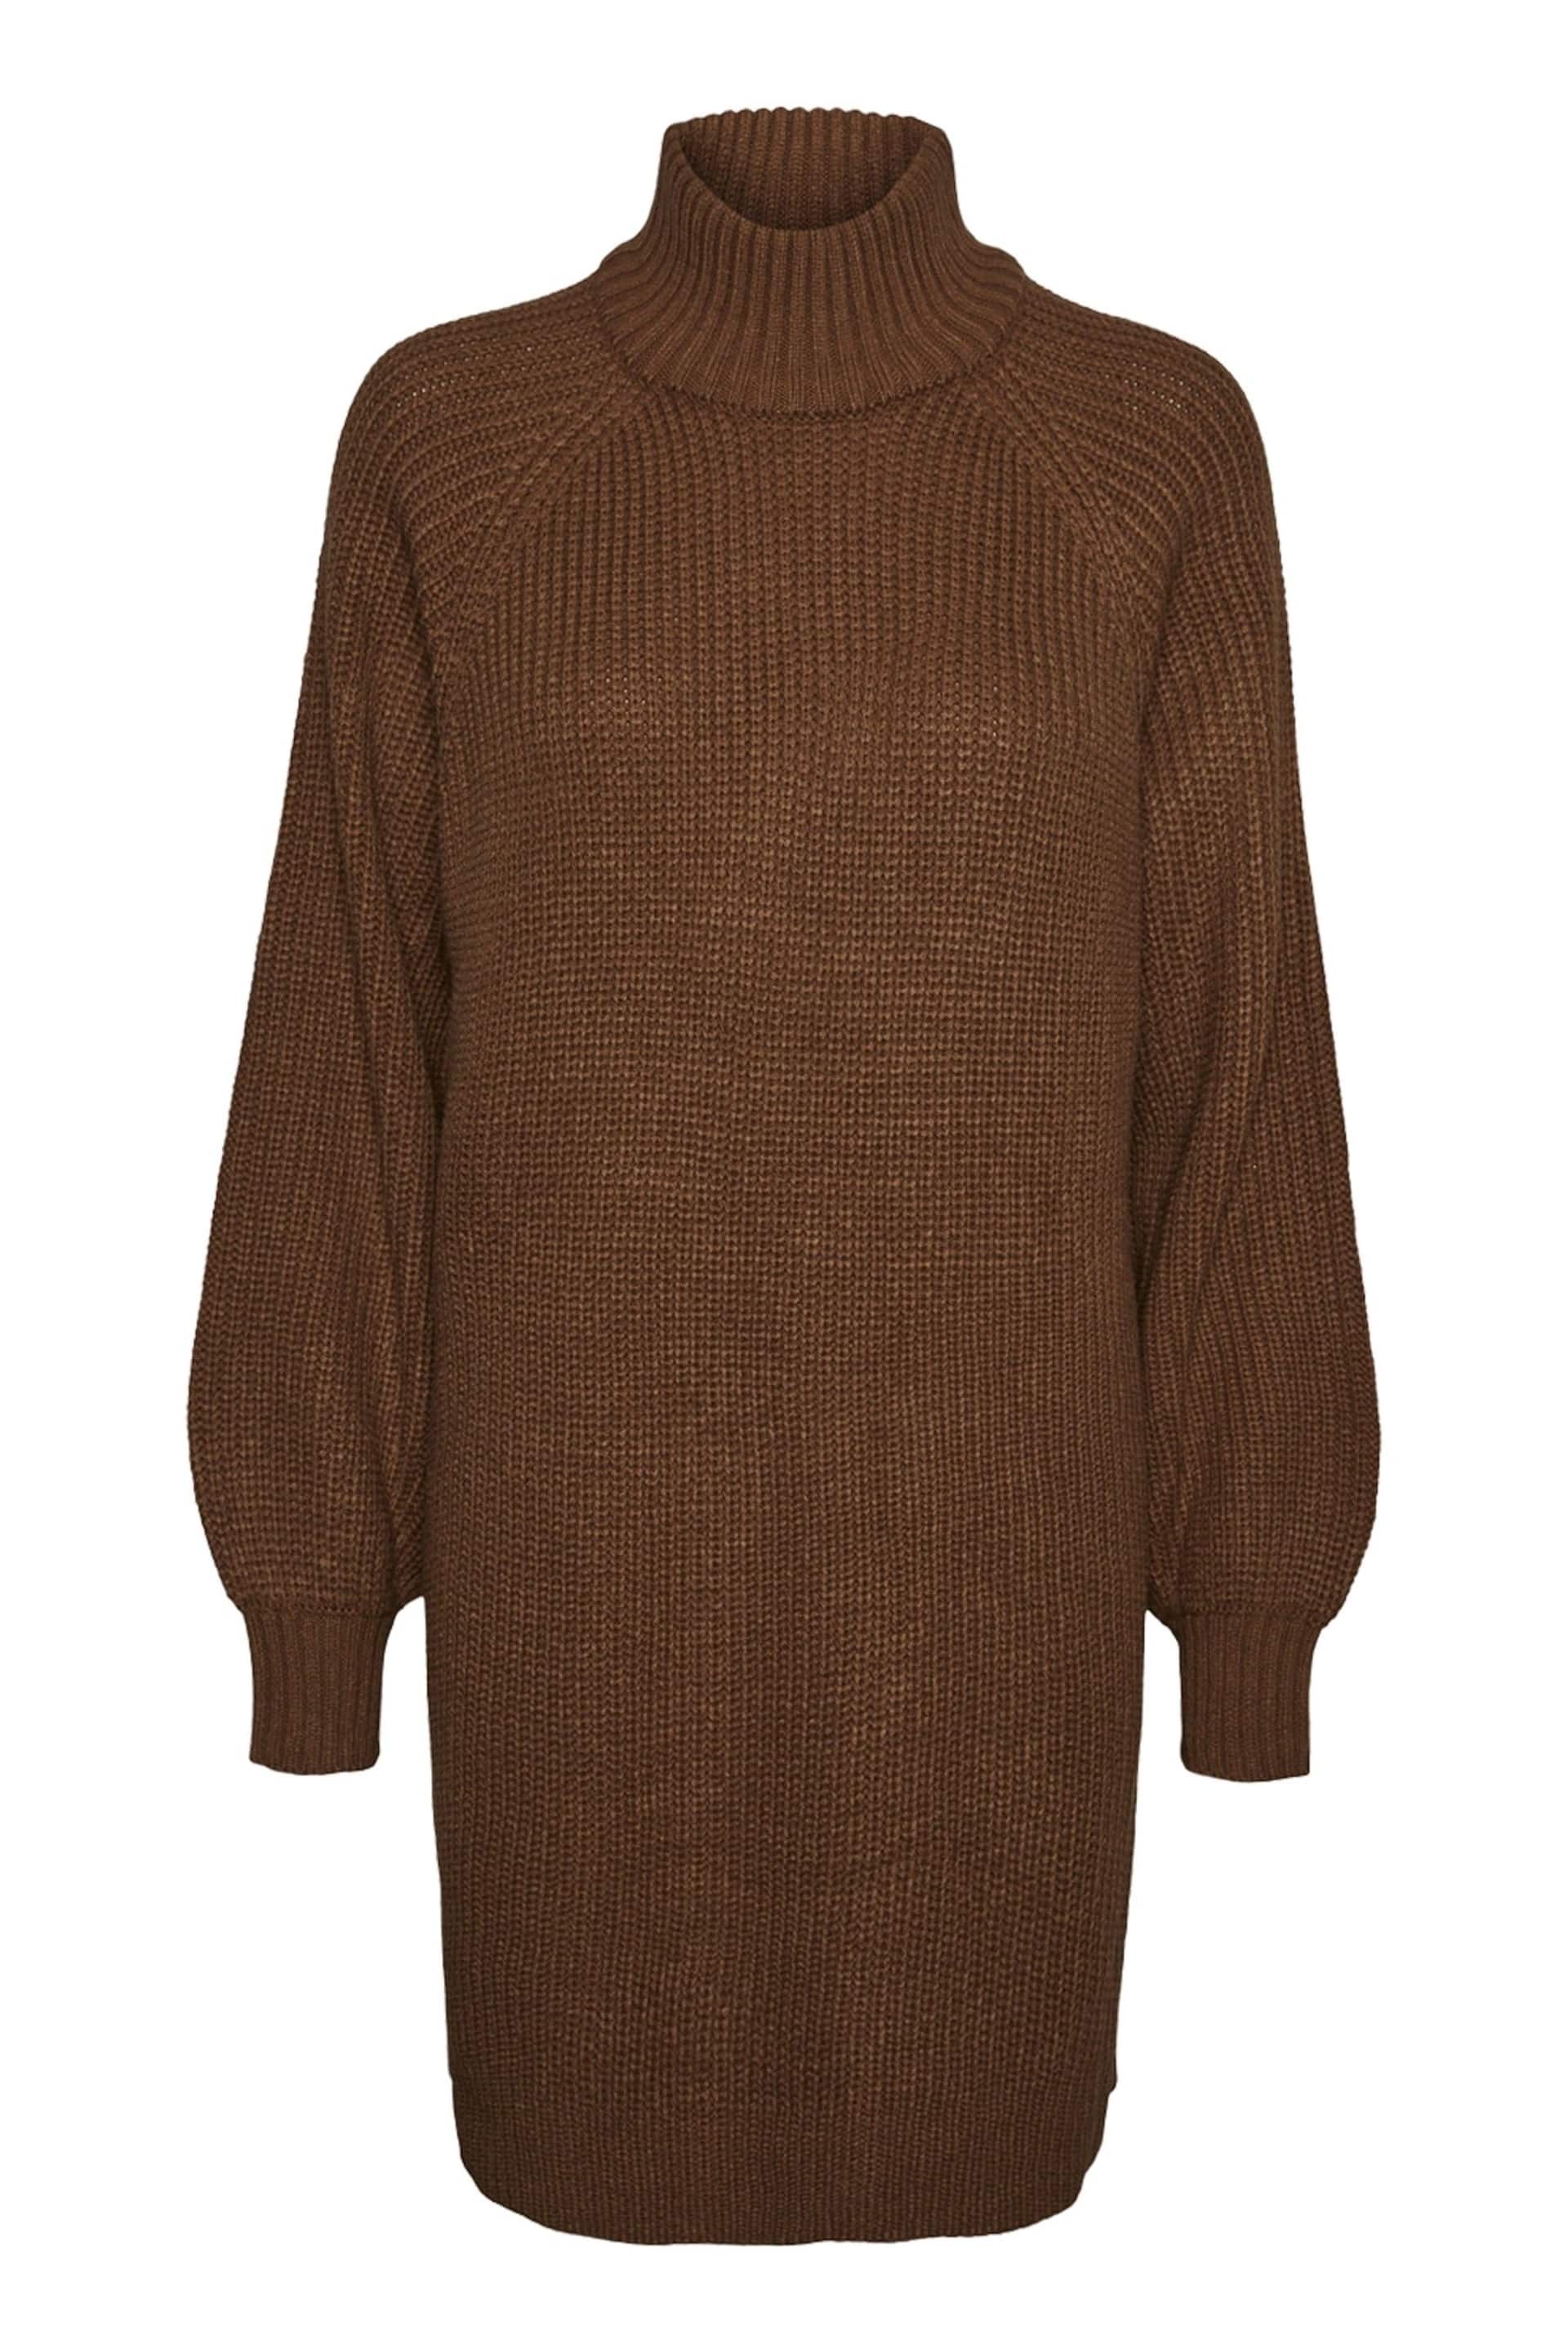 NOISY MAY Brown High Neck Knitted Jumper Dress - Image 5 of 5